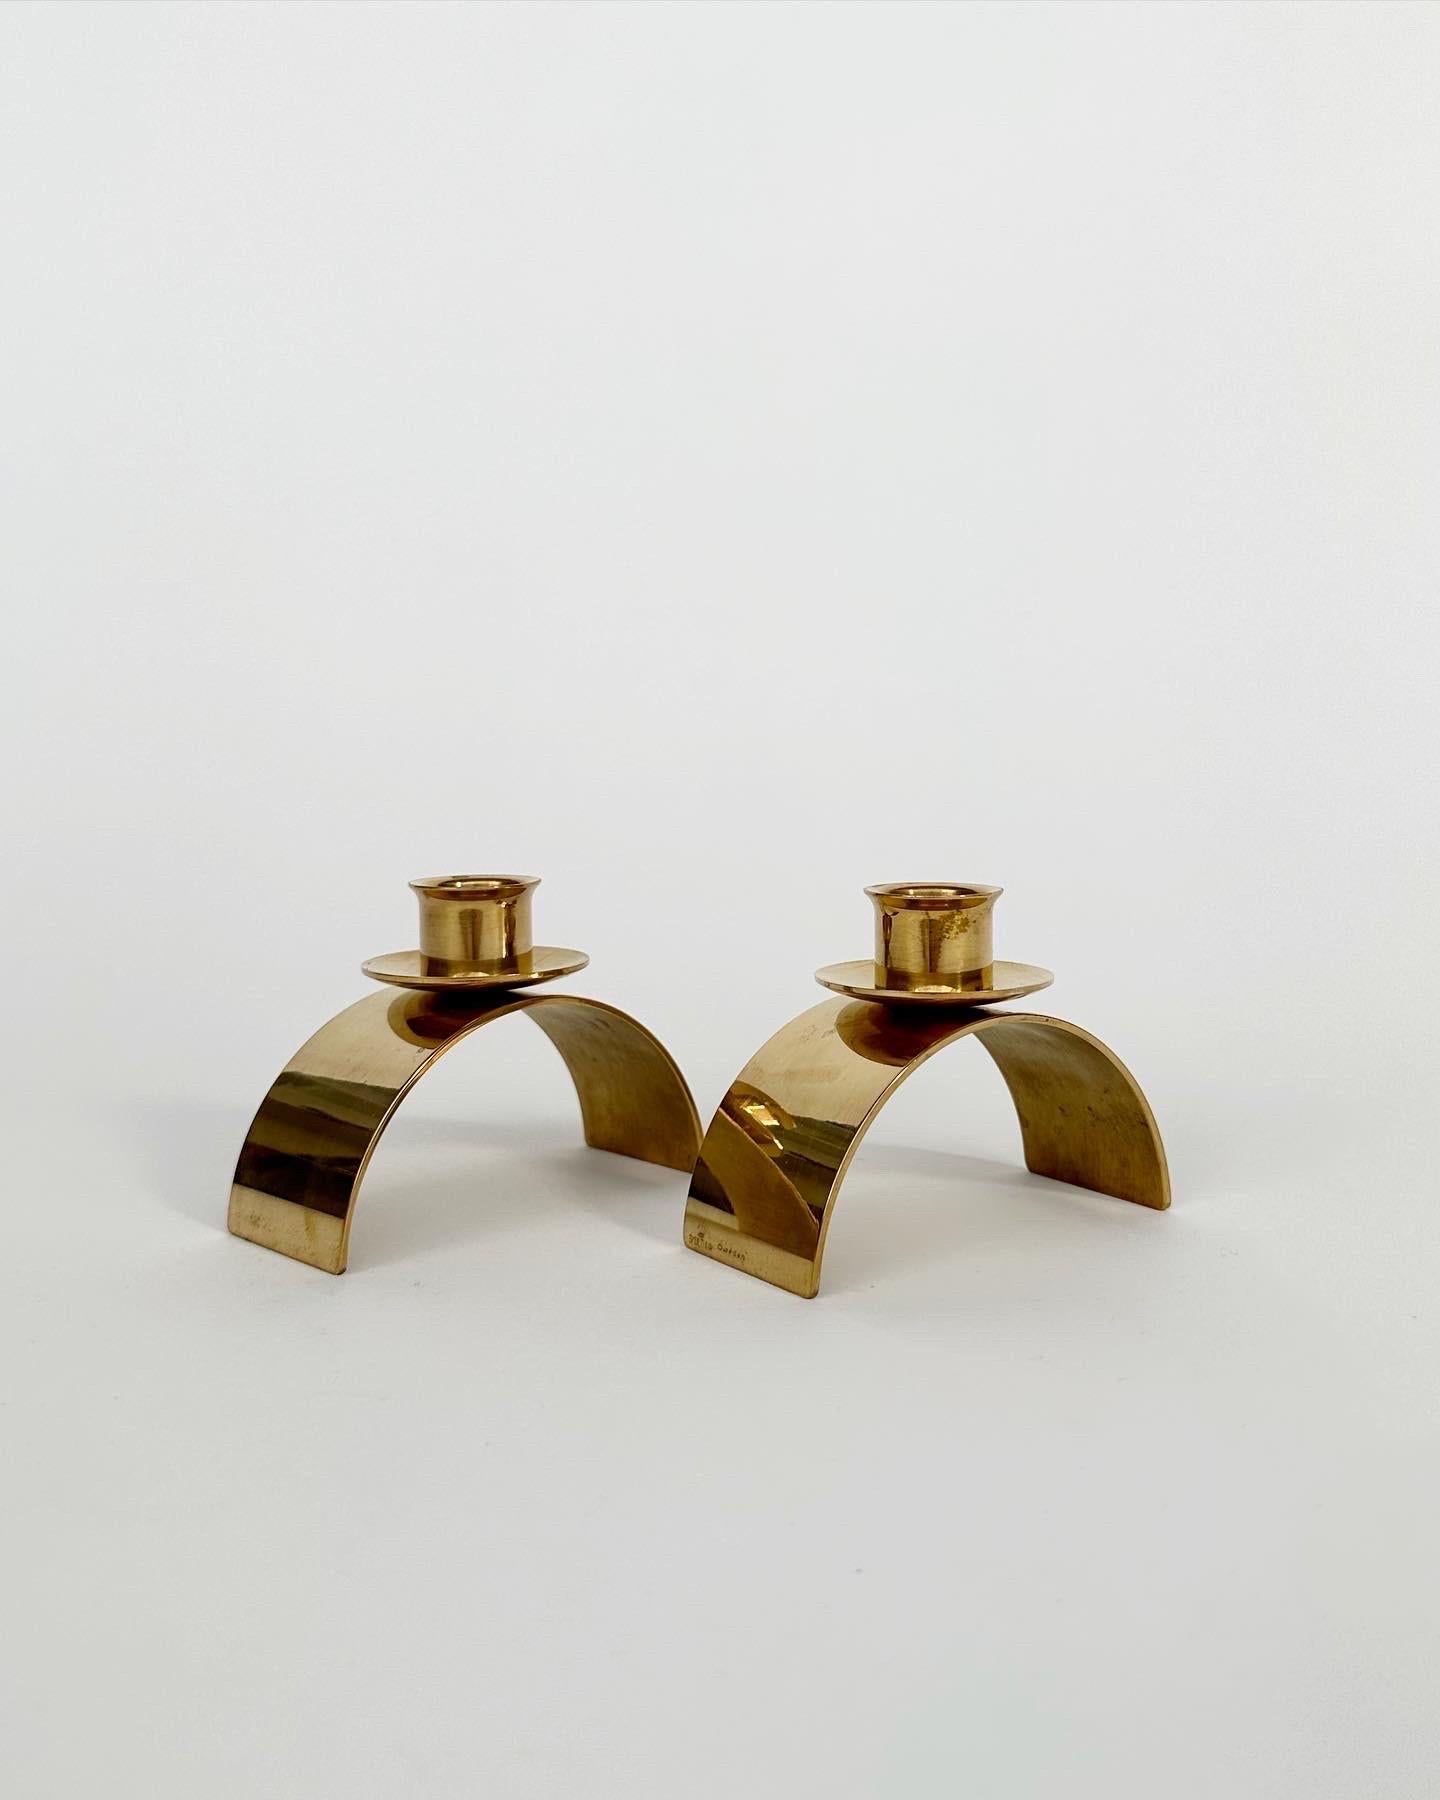 Pair of rare Gunnar Ander „Valvet“ candle sticks in solid brass, made by Skultuna in Sweden in 1995.

Marked with the creators initials, the date and Skultuna logo.

Width: 10 cm
Depth: 4.5 cm
Height: 7.5 cm 
For standard candles with 2 cm.